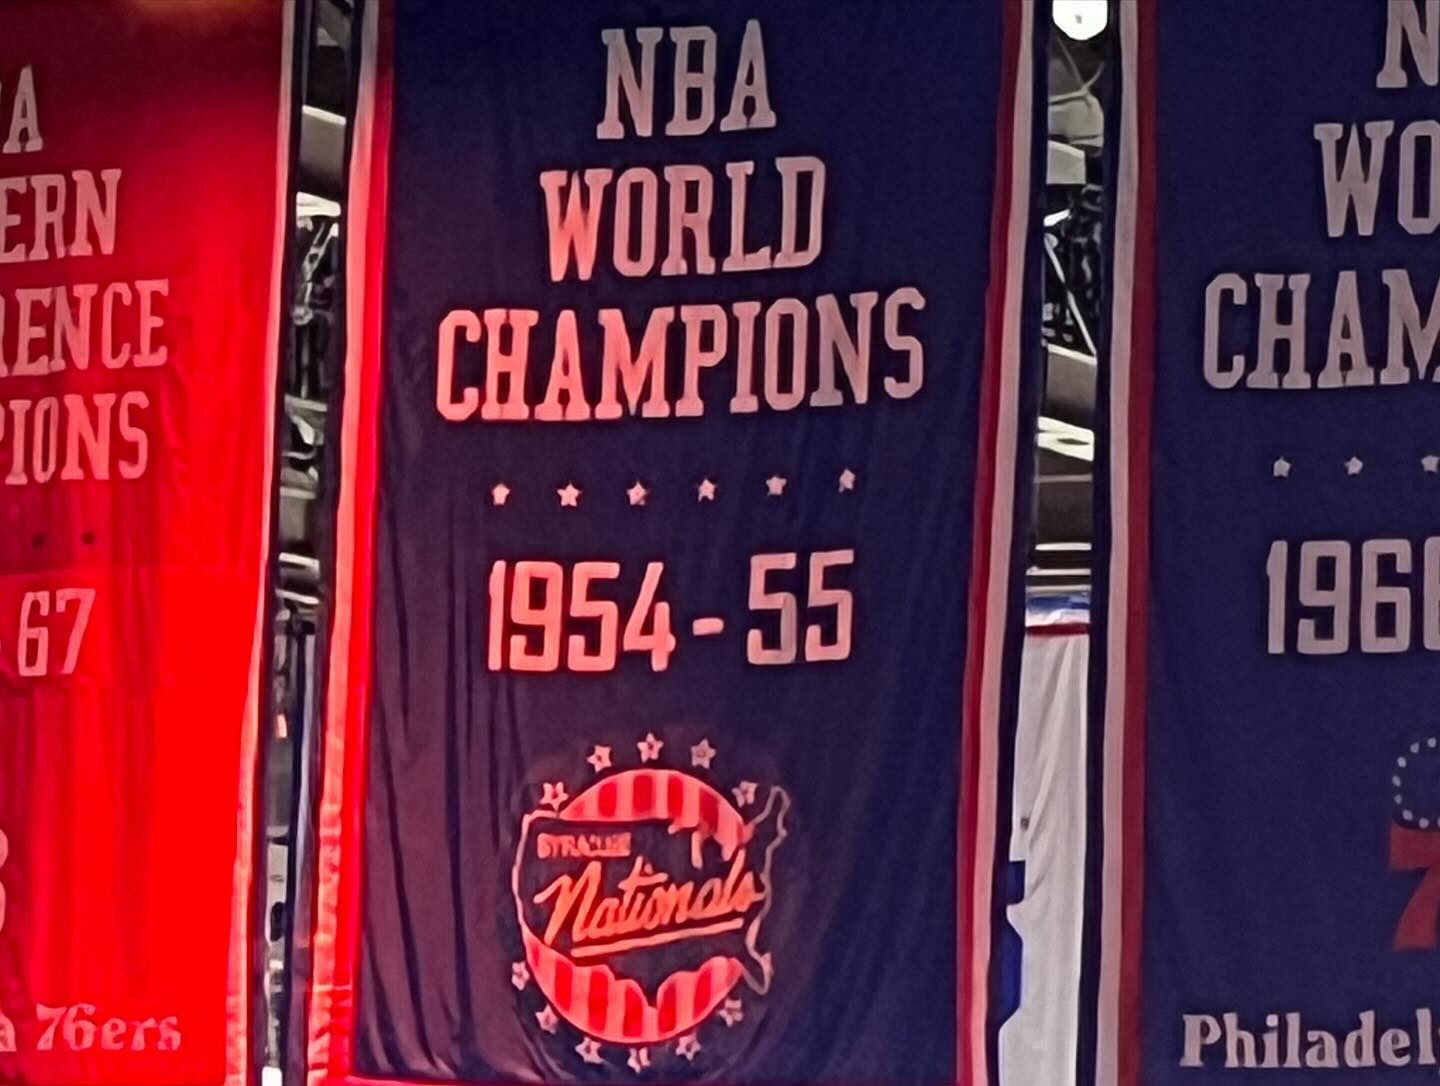 DID YOU KNOW that the Syracuse Nationals, the former NBA team in Syracuse, NY were the NBA champs in 1955? A few years later, in 1963, they were sold and moved to Philadelphia, where they became the Seventy-Sixers. The 76ers went on to become champs in their new city - in 1967. #76ersbasketball #syracusehistory #upstateny #philadelphia #wellsfargocenter #happyupstate #notupstate#nba #nbahistory #syracusenationals